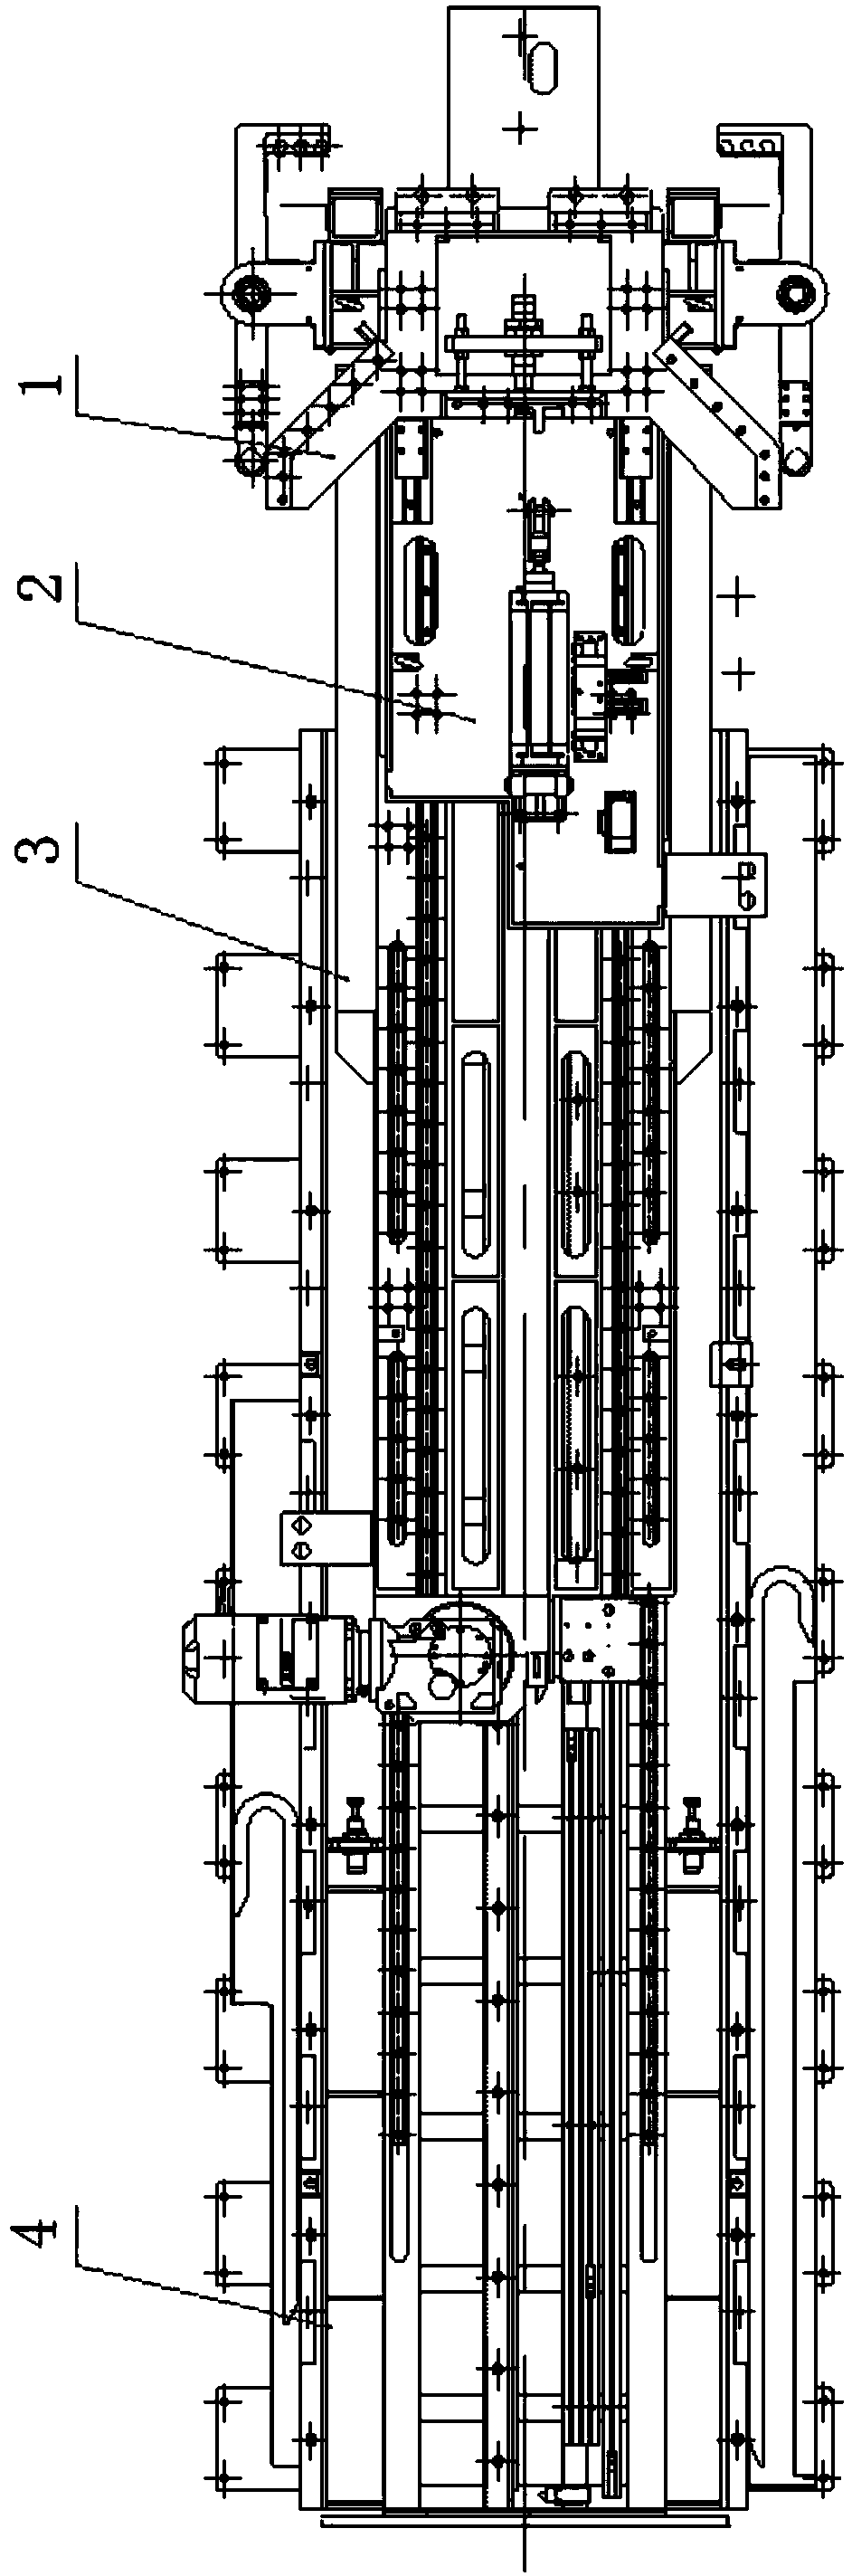 Material vehicle automatic transfer mechanism